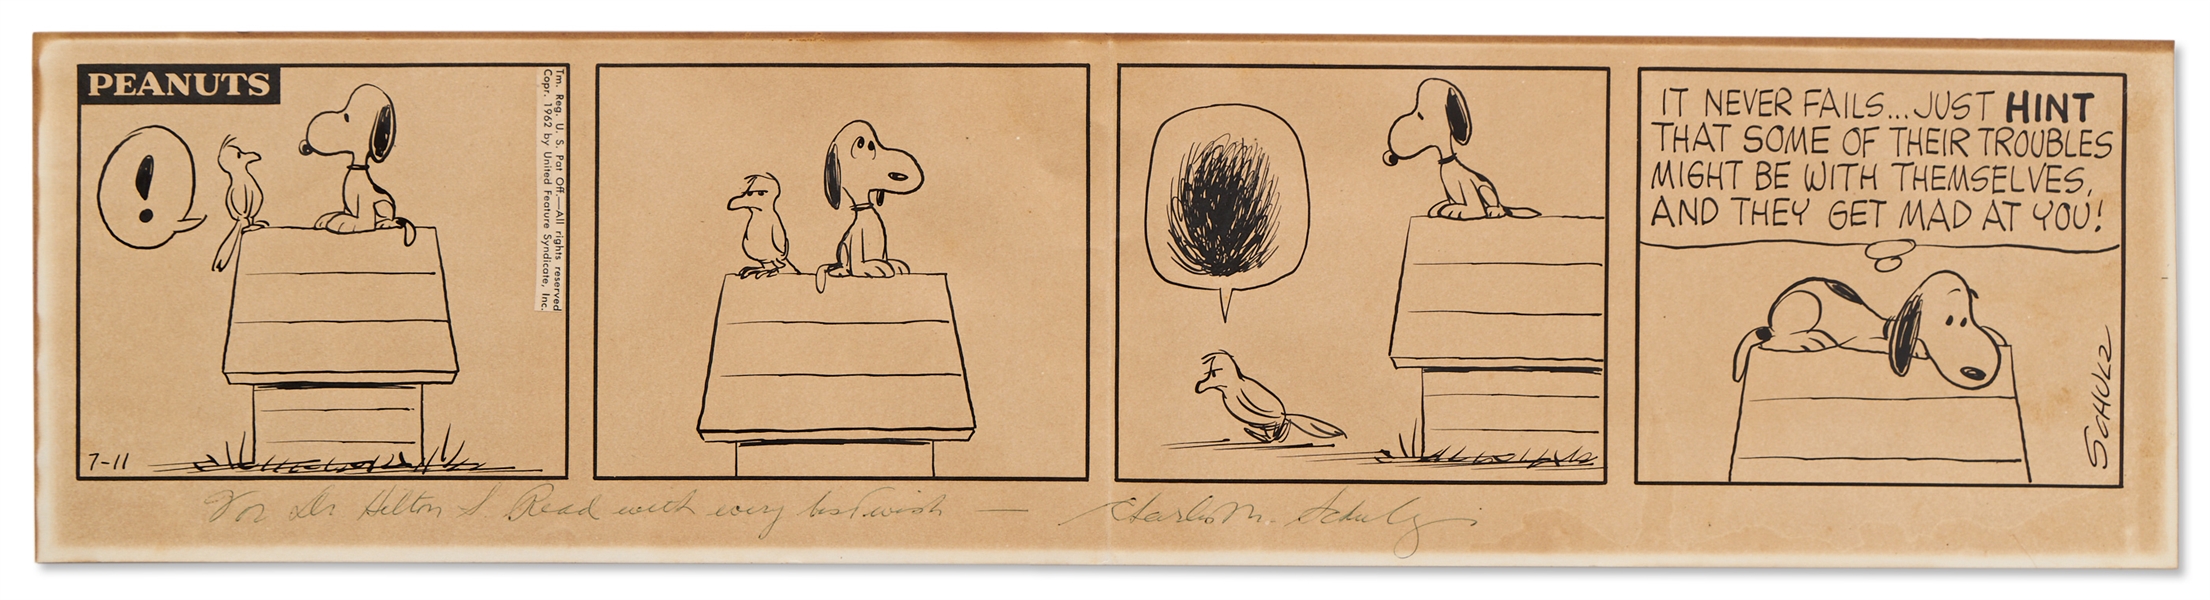 Original Charles Schulz Hand-Drawn Peanuts Comic Strip from 1962 -- Snoopy Befriends a Bird Whos Perched on His Doghouse